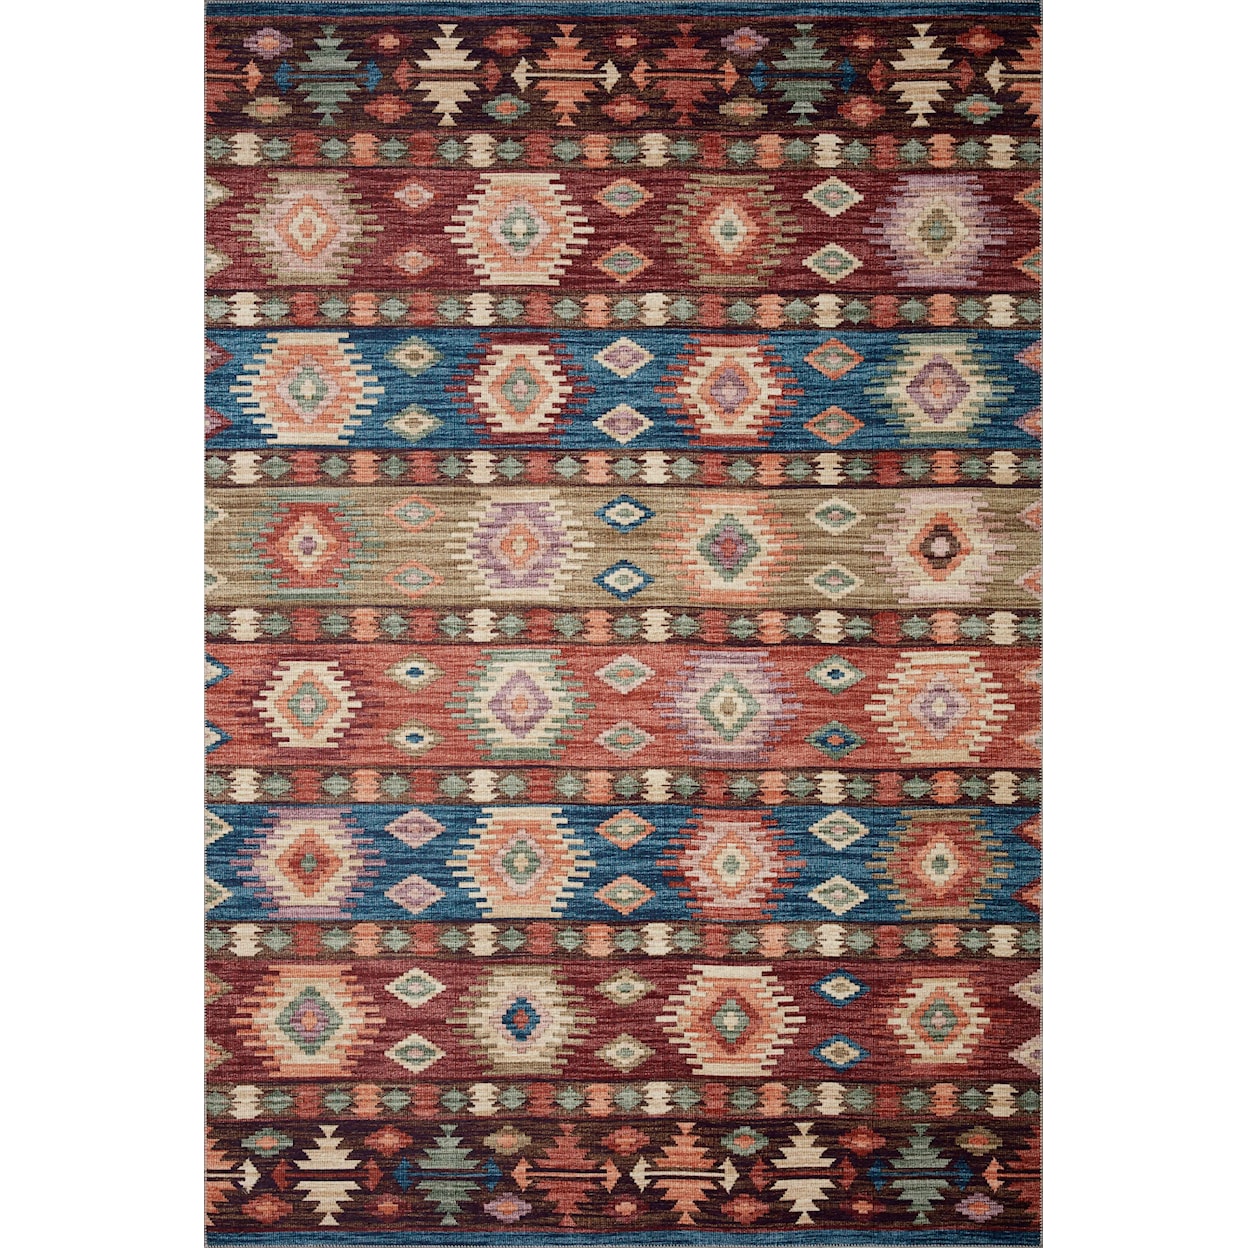 Reeds Rugs Zion 18" x 18"  Rug